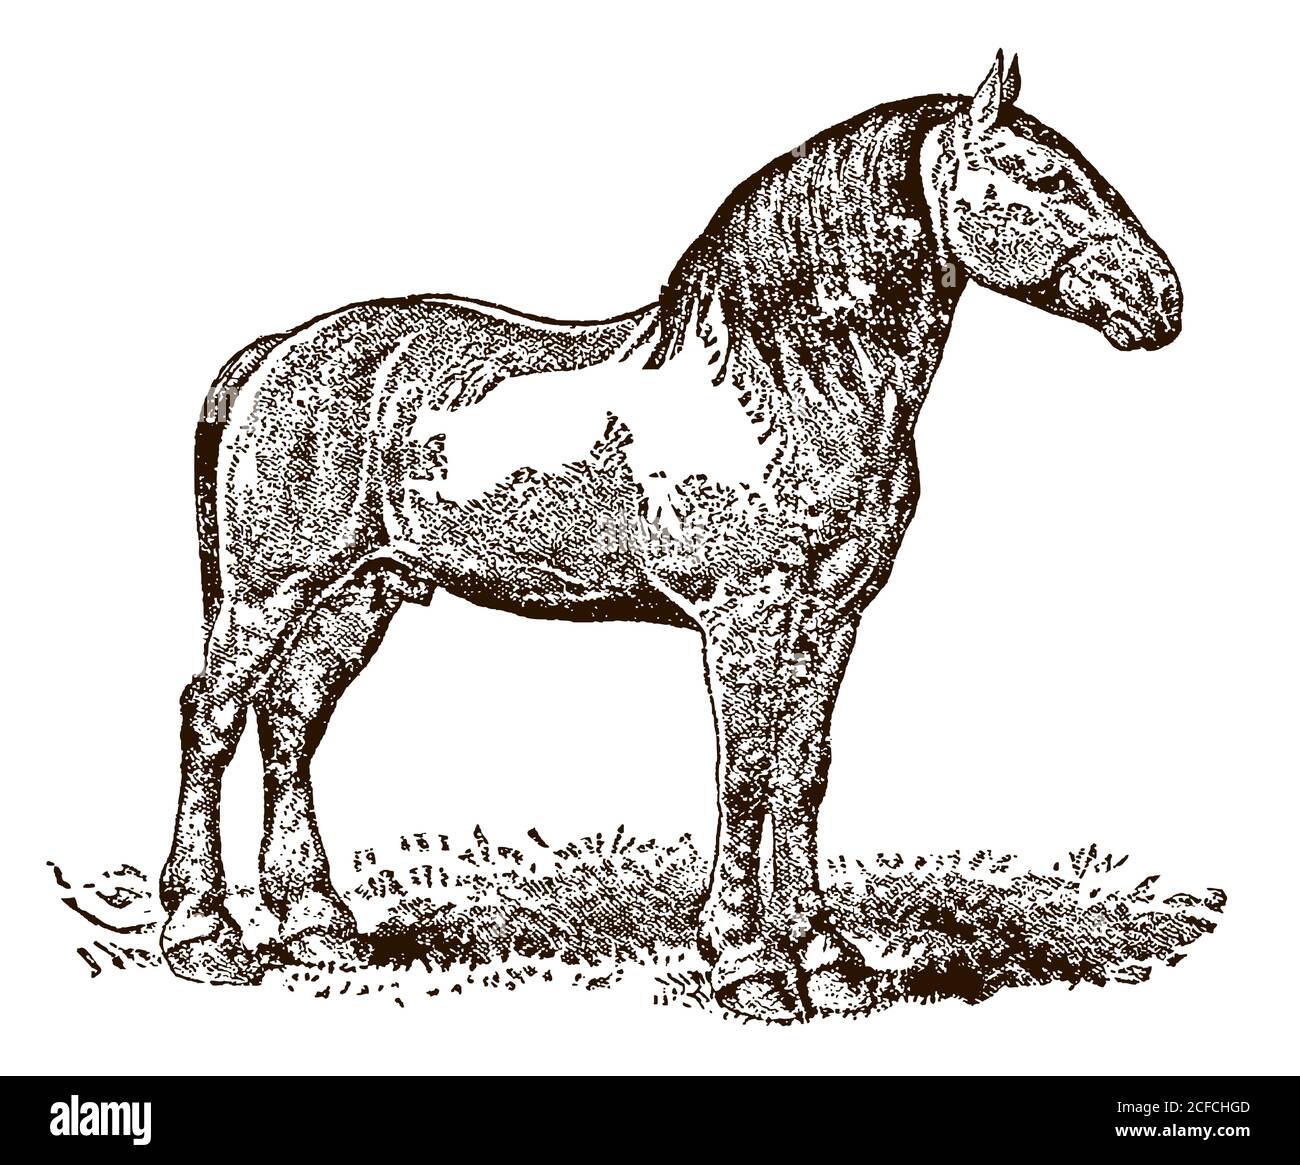 Percheron draft horse in side view standing on a meadow, after an antique illustration from the 19th century Stock Vector